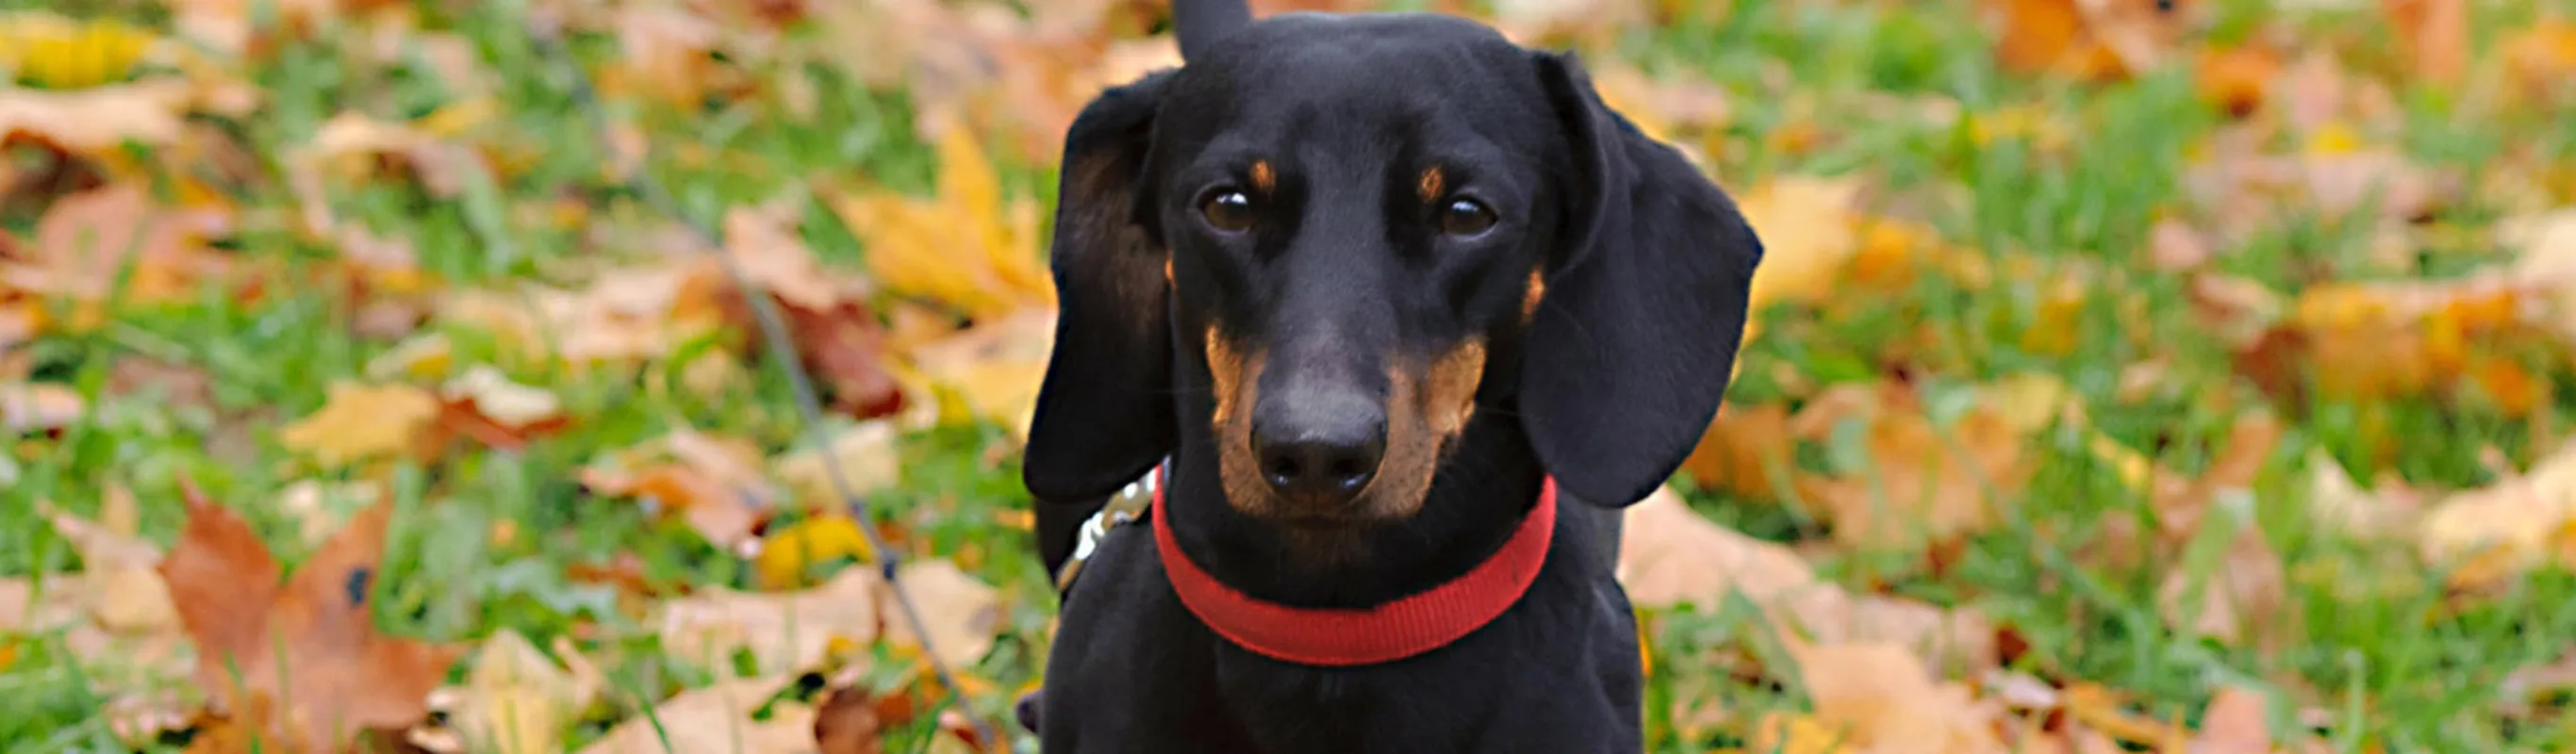 Dachshund is walking through a park with fallen leaves on the ground.